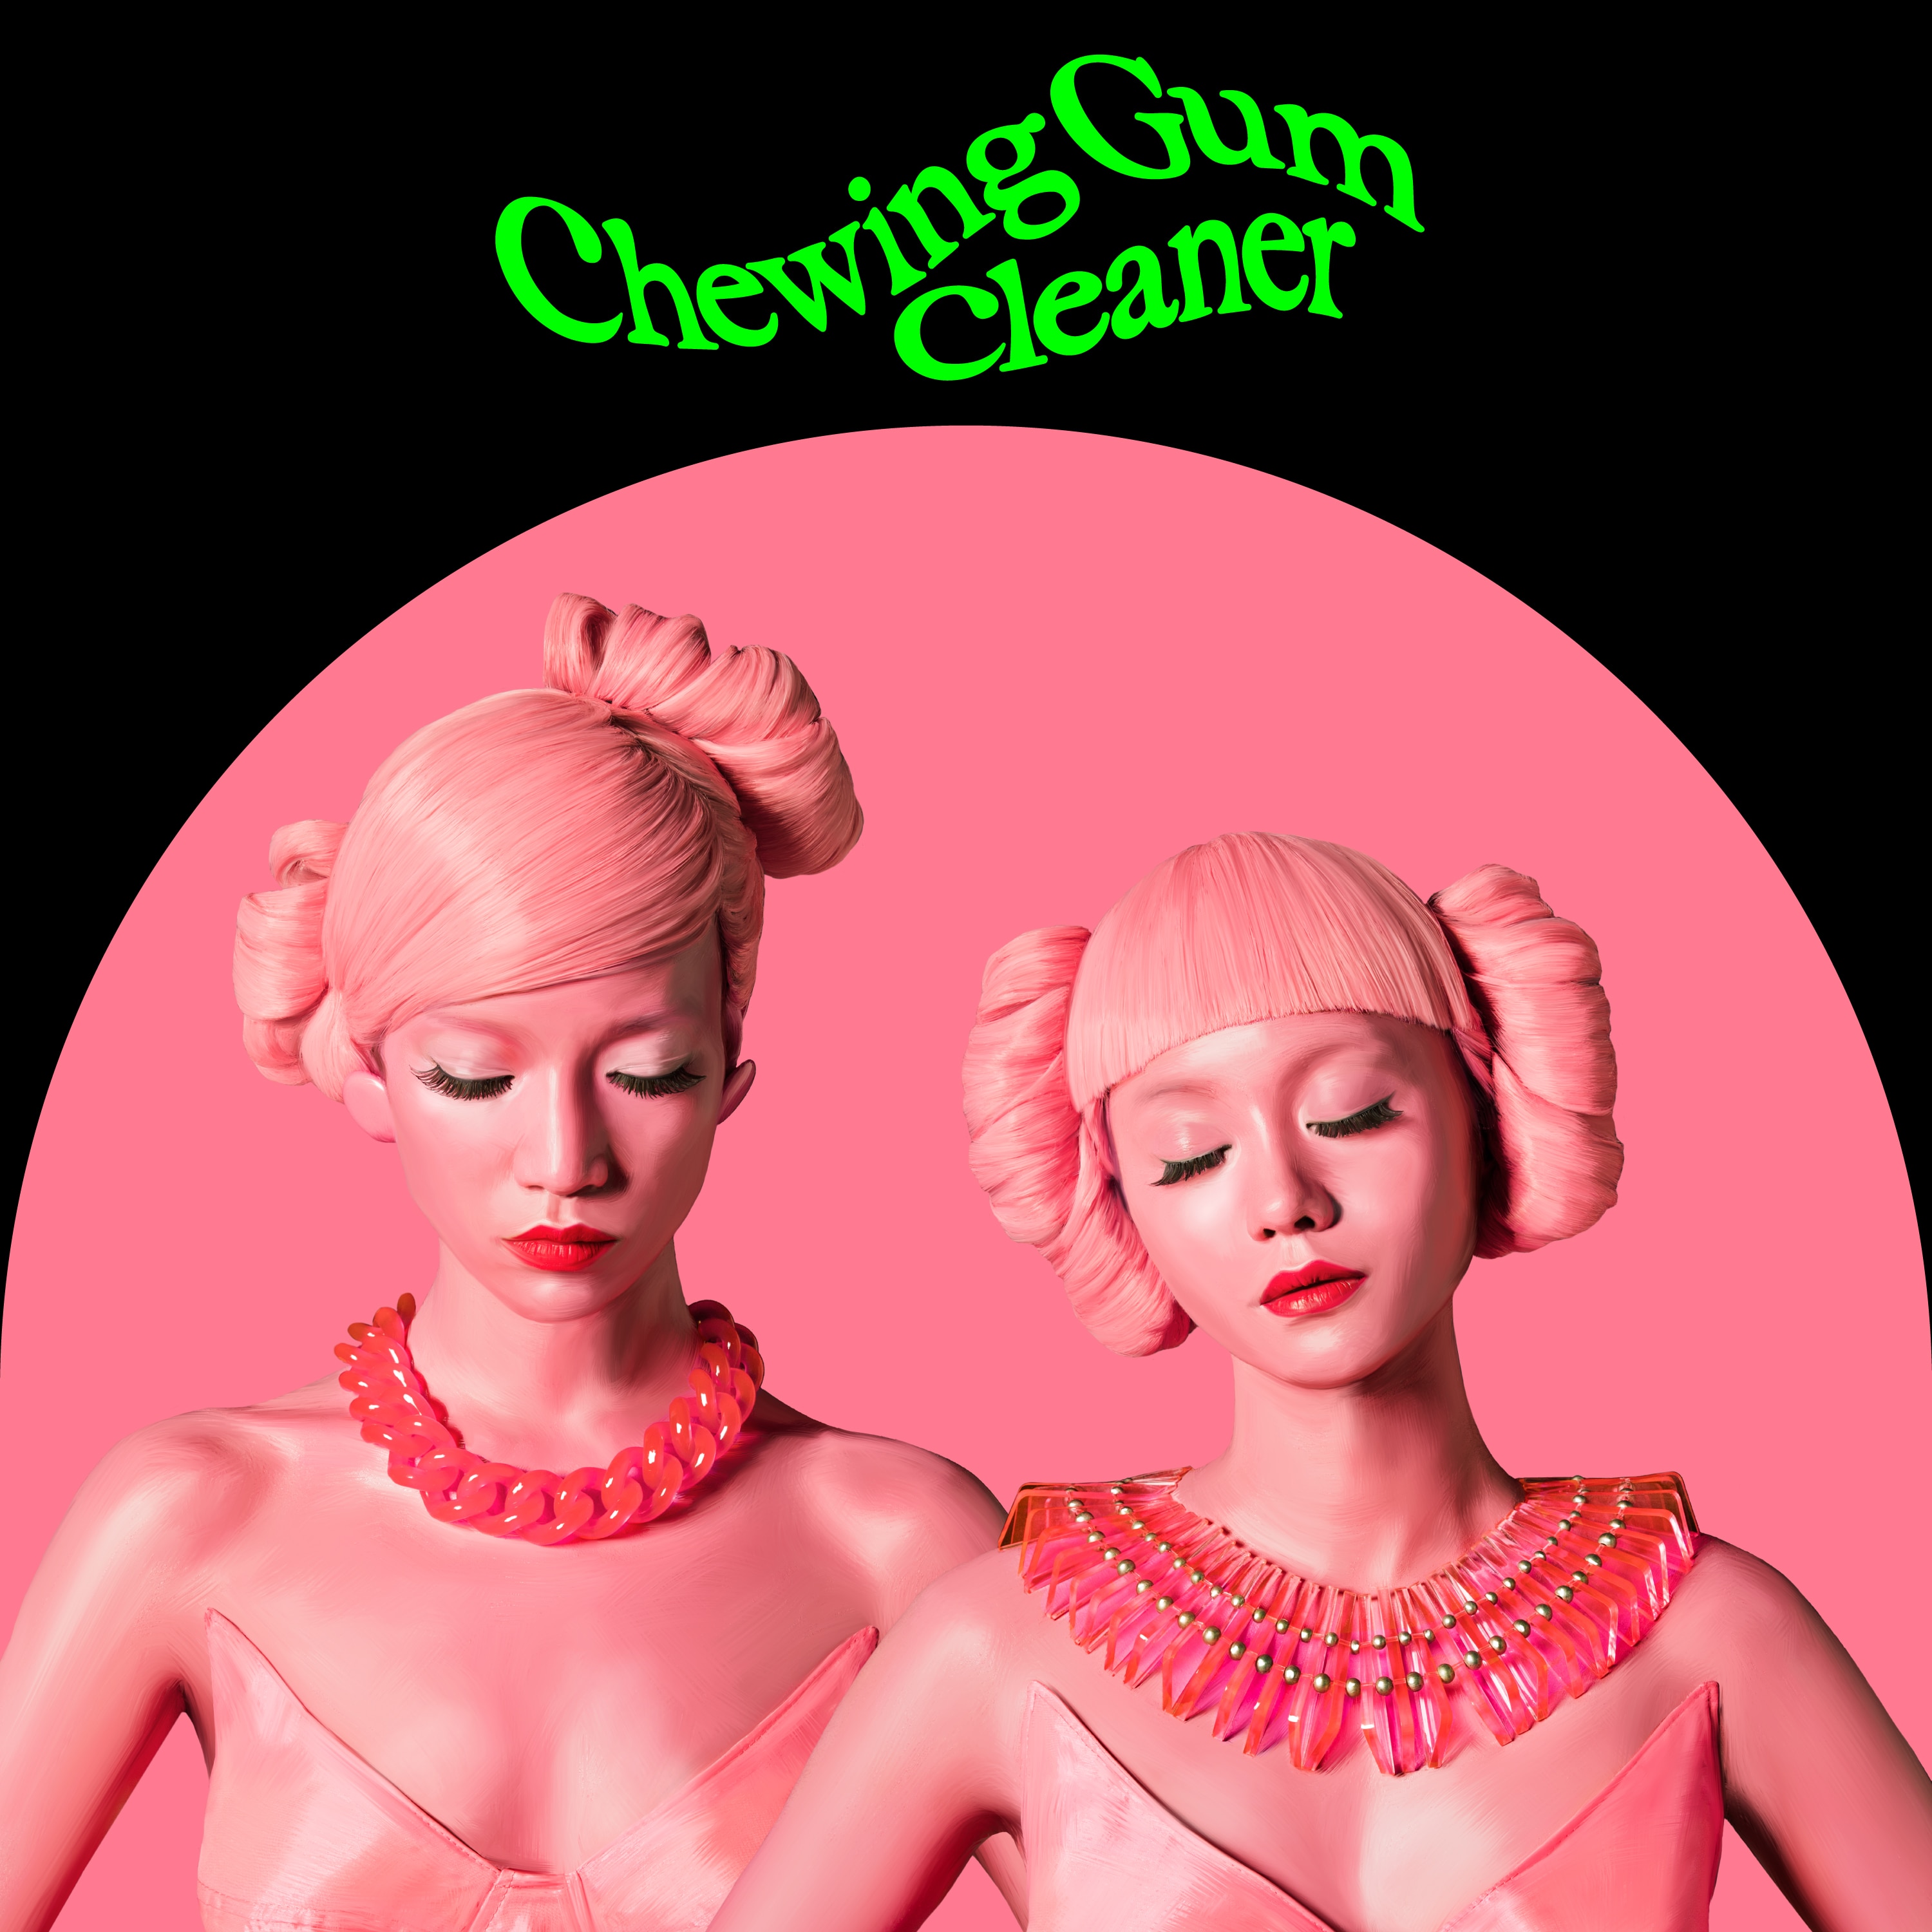 Chewing Gum Cleaner